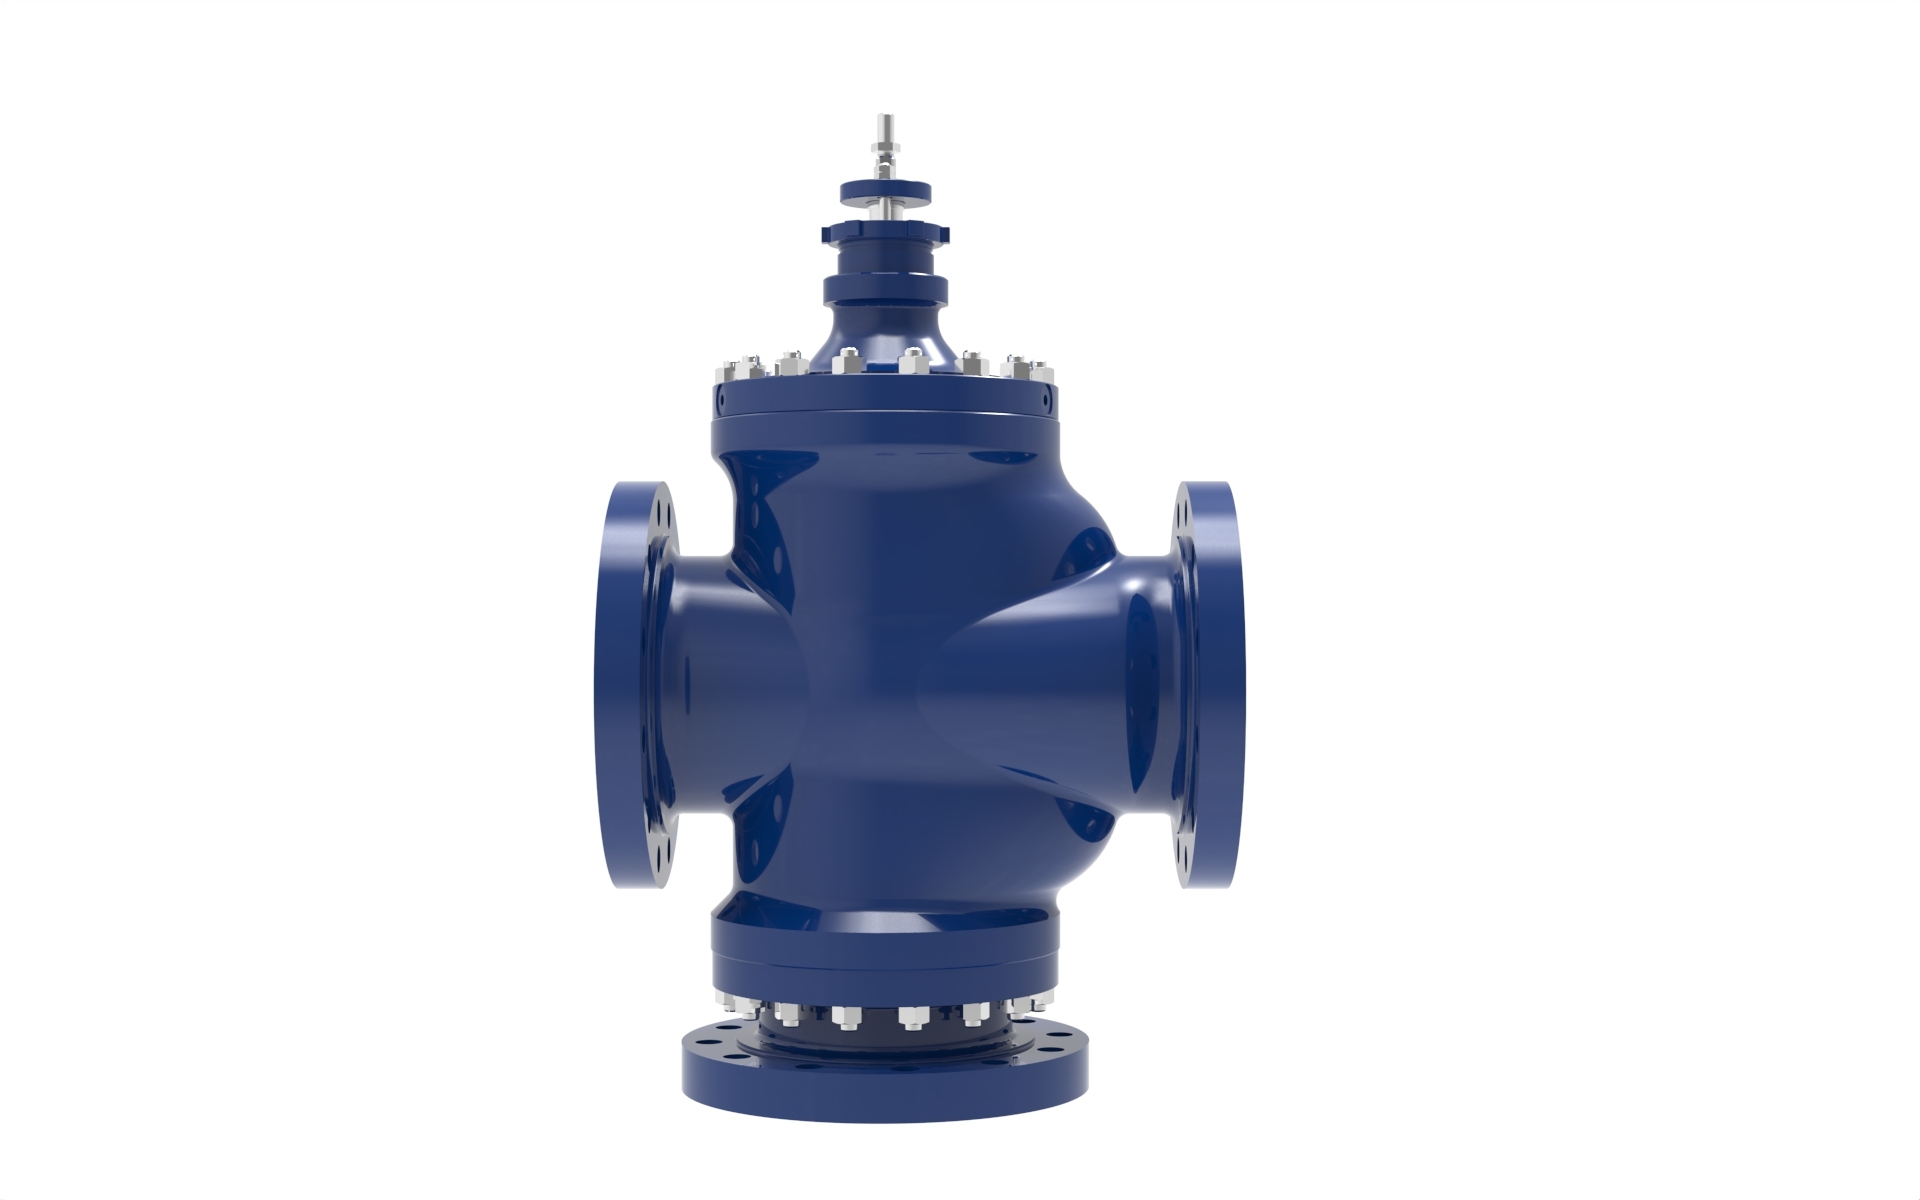 Right side view of a Blakeborough BV831 Three Way Valve manufactured by Trillium Flow Technologies